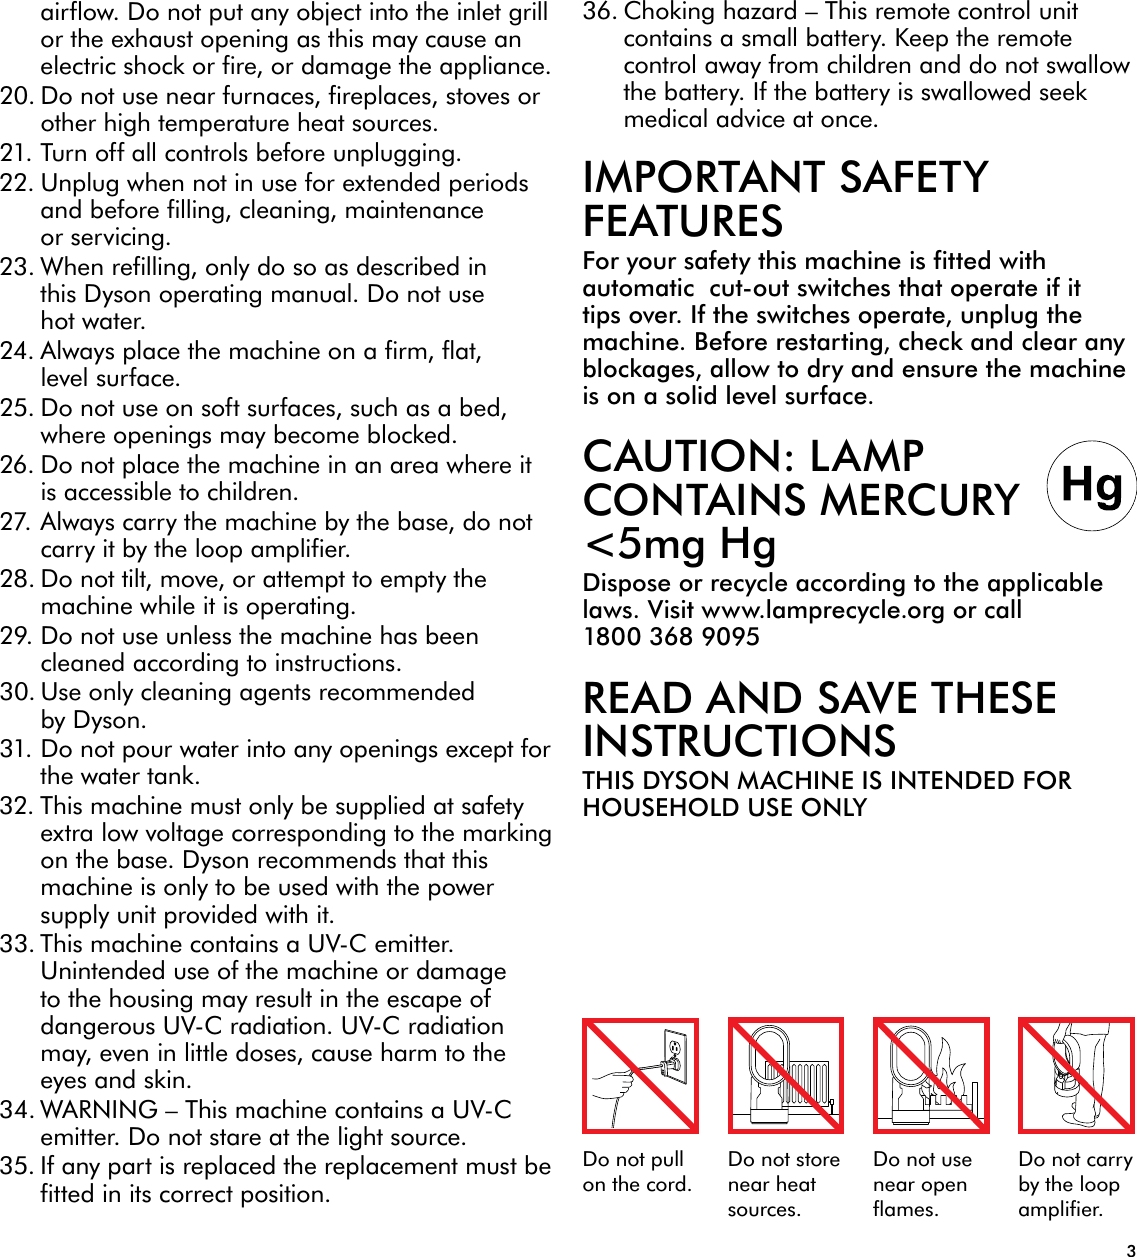 3Do not pull on the cord.Do not store near heat sources.Do not use near open flames.Do not carry by the loop amplifier.airflow. Do not put any object into the inlet grill or the exhaust opening as this may cause an electric shock or fire, or damage the appliance.20. Do not use near furnaces, fireplaces, stoves or other high temperature heat sources.21. Turn off all controls before unplugging.22. Unplug when not in use for extended periods and before filling, cleaning, maintenance or servicing.23. When refilling, only do so as described in this Dyson operating manual. Do not use hot water.24. Always place the machine on a firm, flat, level surface.25. Do not use on soft surfaces, such as a bed, where openings may become blocked.26. Do not place the machine in an area where it is accessible to children.27. Always carry the machine by the base, do not carry it by the loop amplifier.28. Do not tilt, move, or attempt to empty the machine while it is operating.29. Do not use unless the machine has been cleaned according to instructions.30. Use only cleaning agents recommended by Dyson.31. Do not pour water into any openings except for the water tank.32. This machine must only be supplied at safety extra low voltage corresponding to the marking on the base. Dyson recommends that this machine is only to be used with the power supply unit provided with it.33. This machine contains a UV-C emitter. Unintended use of the machine or damage to the housing may result in the escape of dangerous UV-C radiation. UV-C radiation may, even in little doses, cause harm to the eyes and skin.34. WARNING – This machine contains a UV-C emitter. Do not stare at the light source.35. If any part is replaced the replacement must be fitted in its correct position.36. Choking hazard – This remote control unit contains a small battery. Keep the remote control away from children and do not swallow the battery. If the battery is swallowed seek medical advice at once.IMPORTANT SAFETY FEATURESFor your safety this machine is fitted with automatic  cut-out switches that operate if it tips over. If the switches operate, unplug the machine. Before restarting, check and clear any blockages, allow to dry and ensure the machine is on a solid level surface.CAUTION: LAMP CONTAINS MERCURY &lt;5mg HgDispose or recycle according to the applicable laws. Visit www.lamprecycle.org or call 1800 368 9095READ AND SAVE THESE INSTRUCTIONSTHIS DYSON MACHINE IS INTENDED FOR HOUSEHOLD USE ONLY